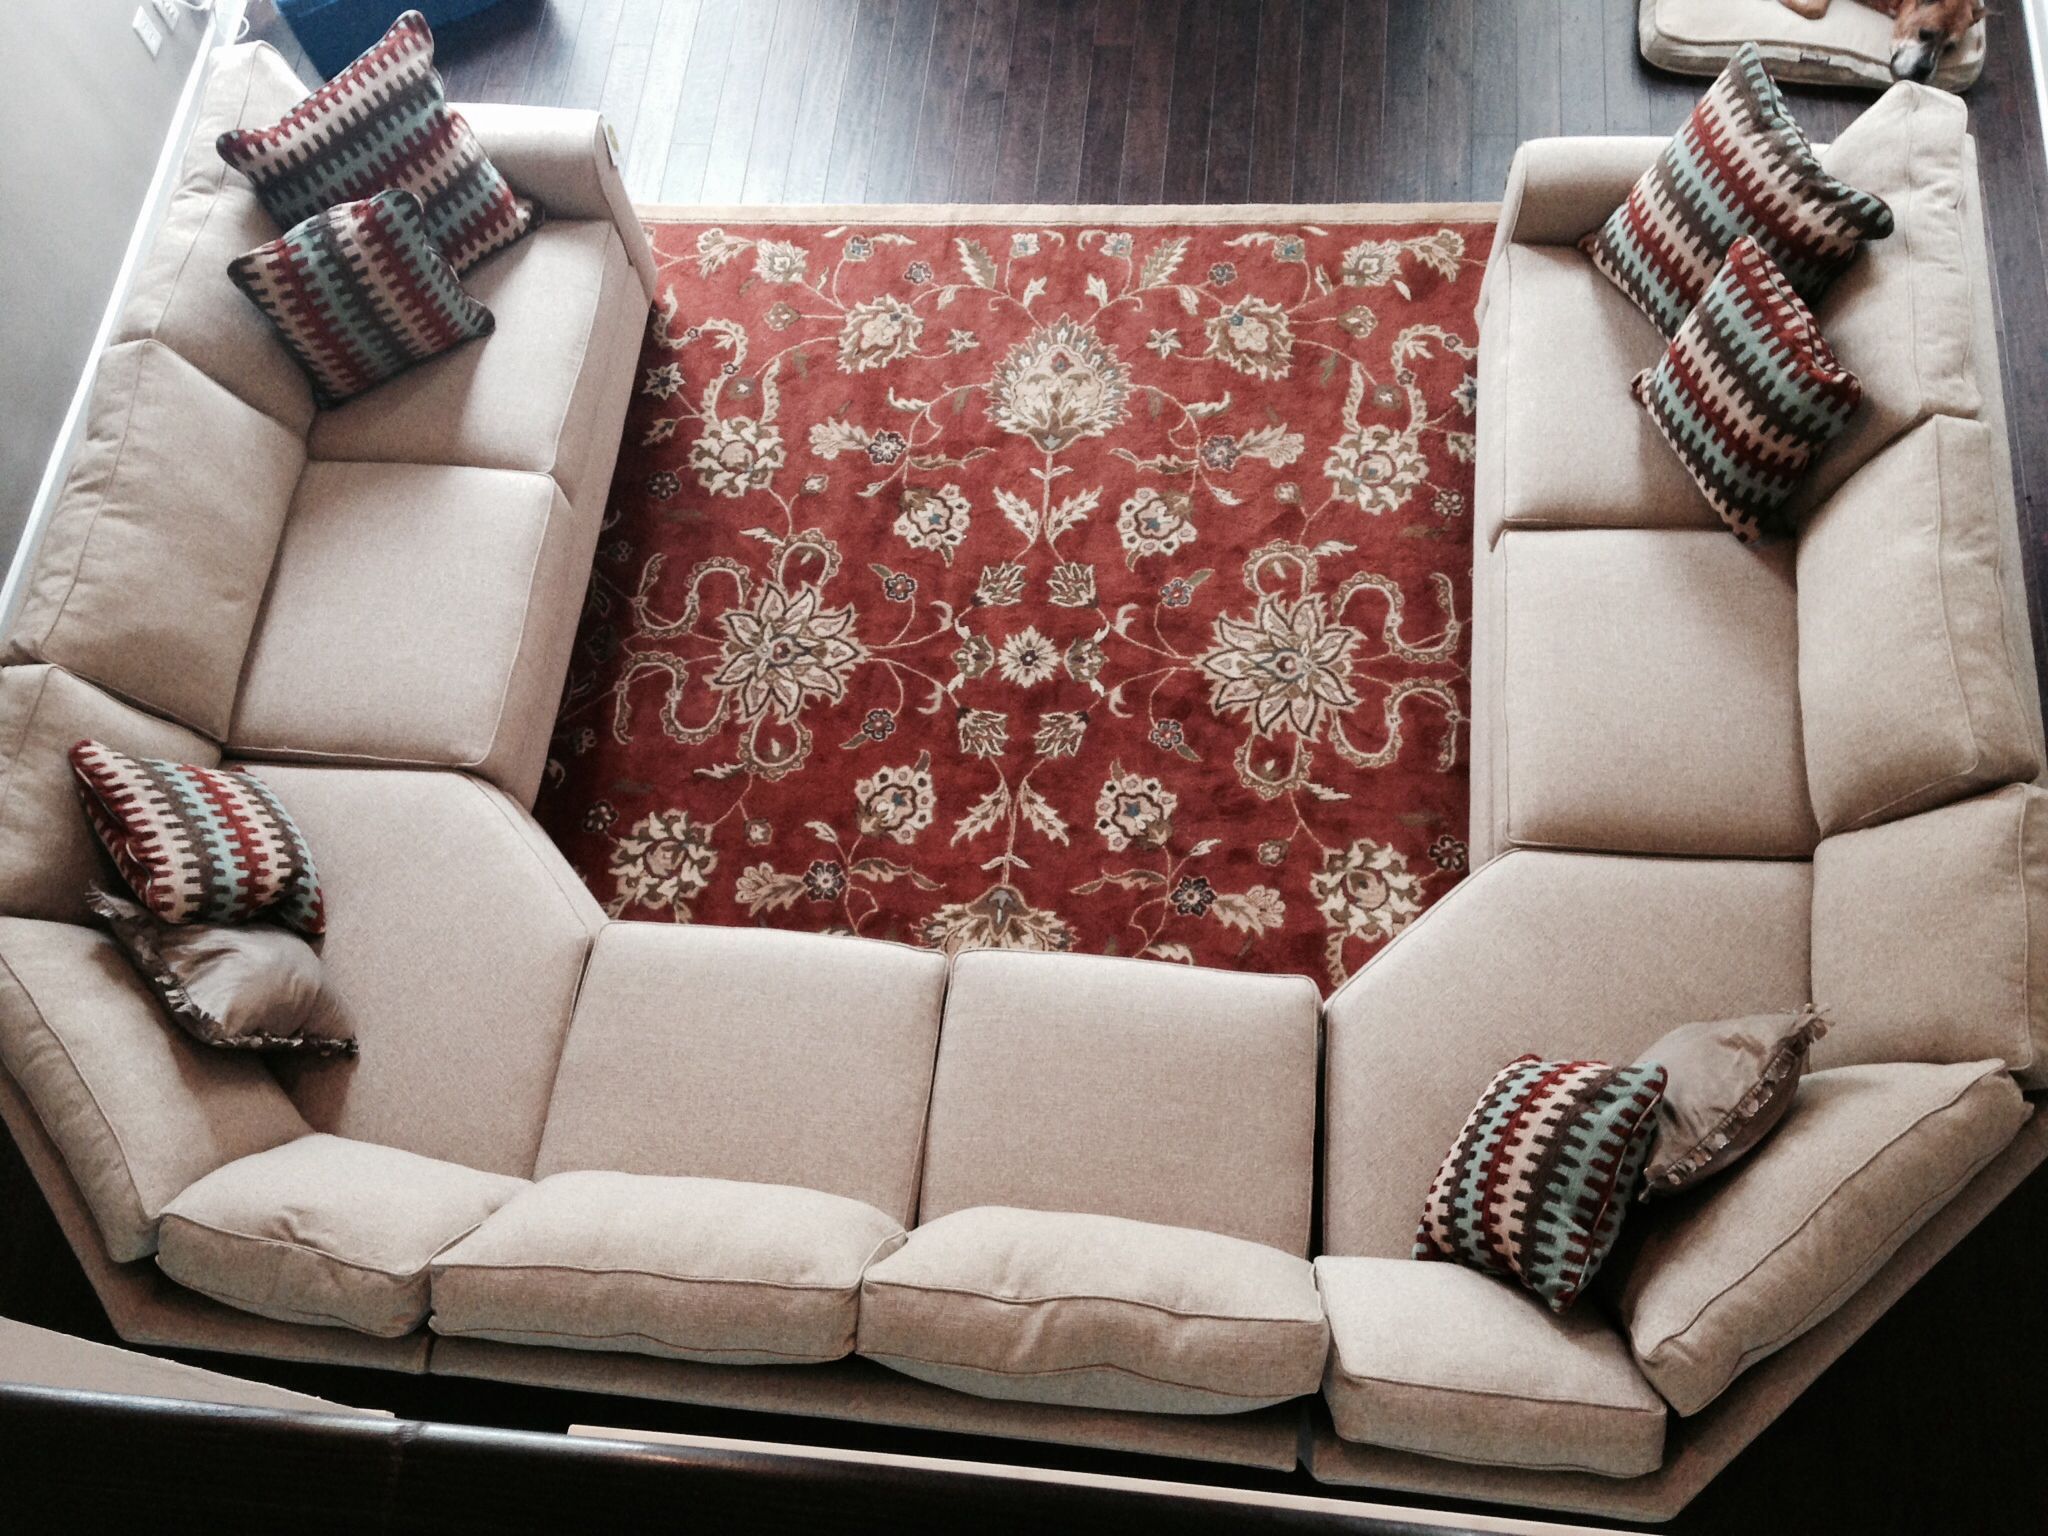 Our New Sofa Inspired The Crate And Barrel U Shaped Sectional Regarding Comfortable Sectional Sofa (View 13 of 15)